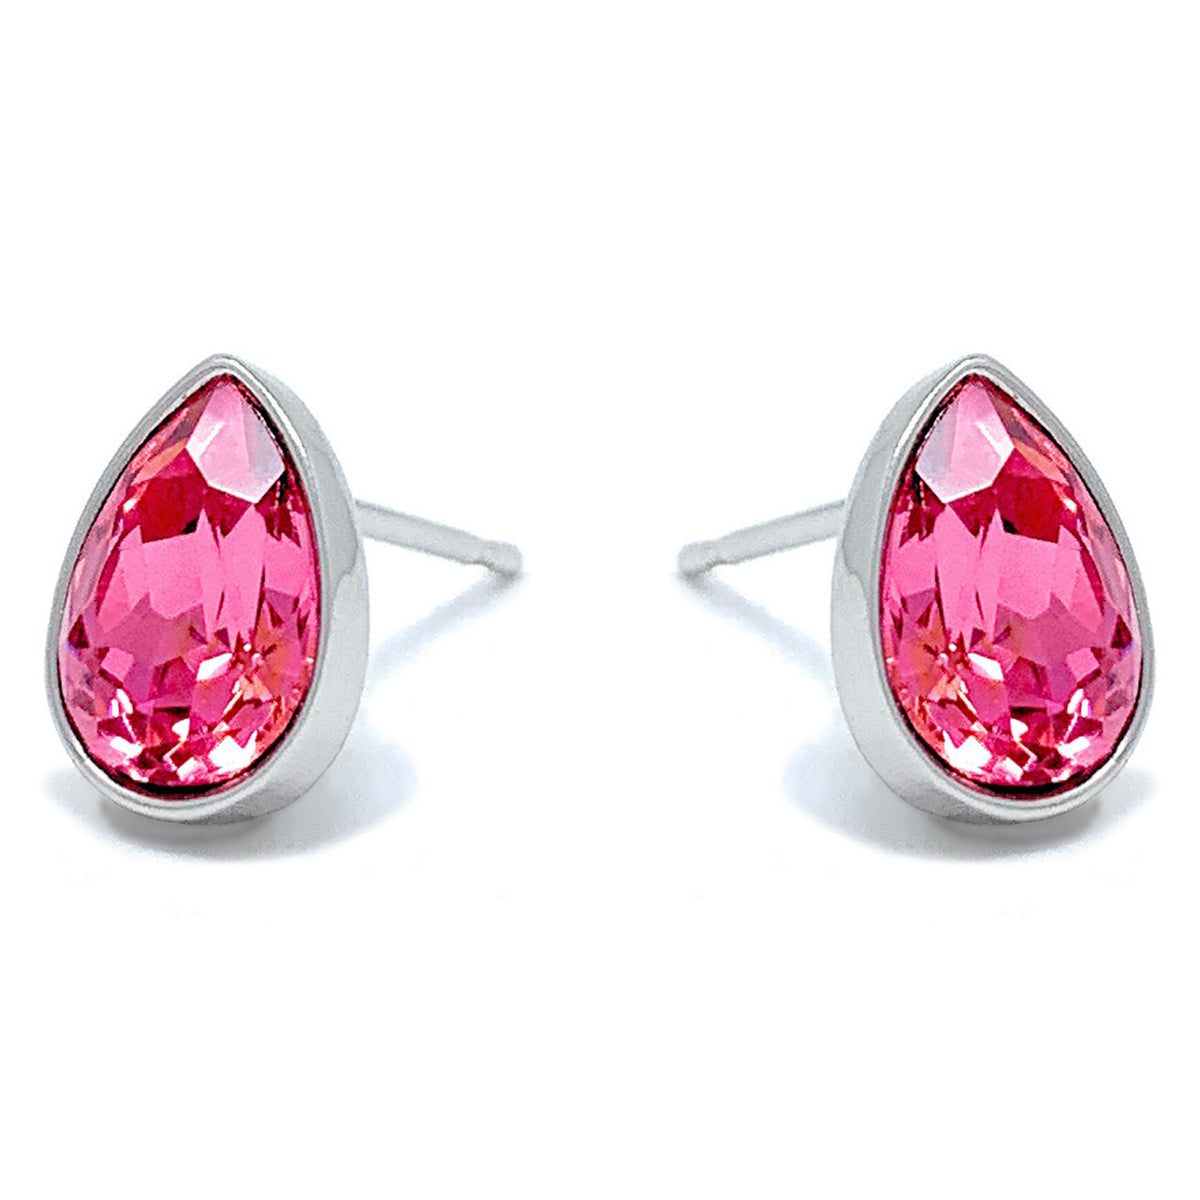 Mary Small Stud Earrings with Pink Rose Drop Crystals from Swarovski Silver Toned Rhodium Plated - Ed Heart